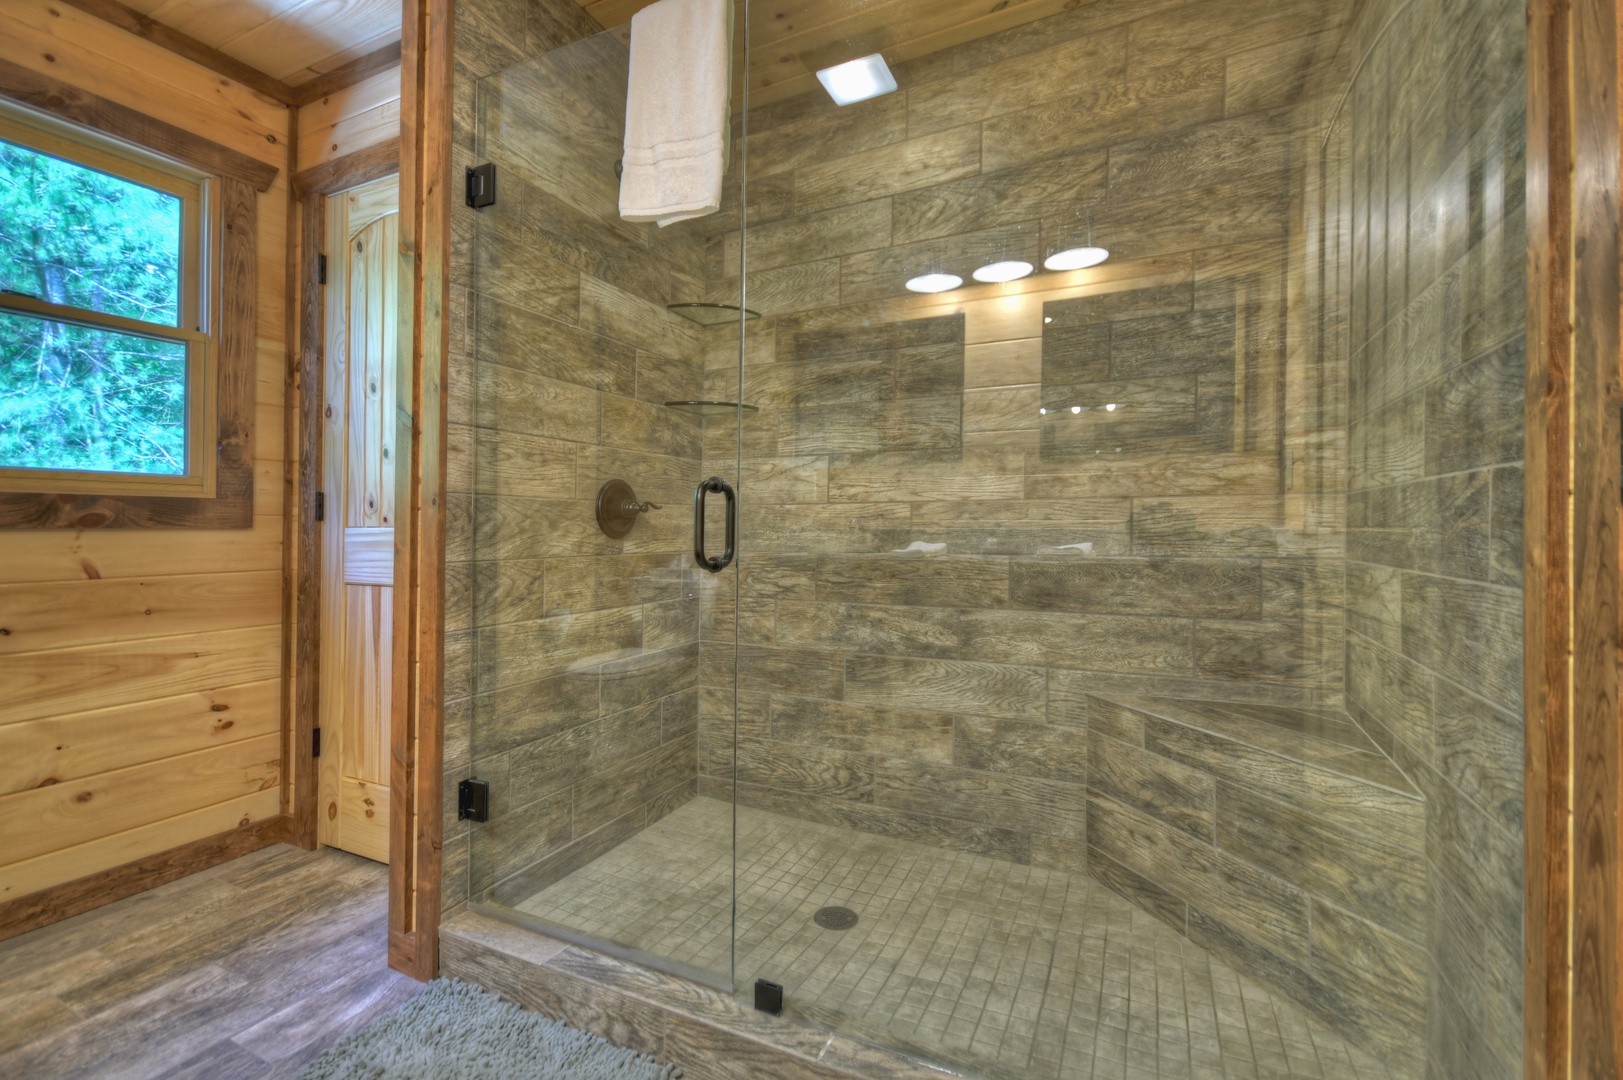 Are We There Yet- Upper level master suite walk in shower